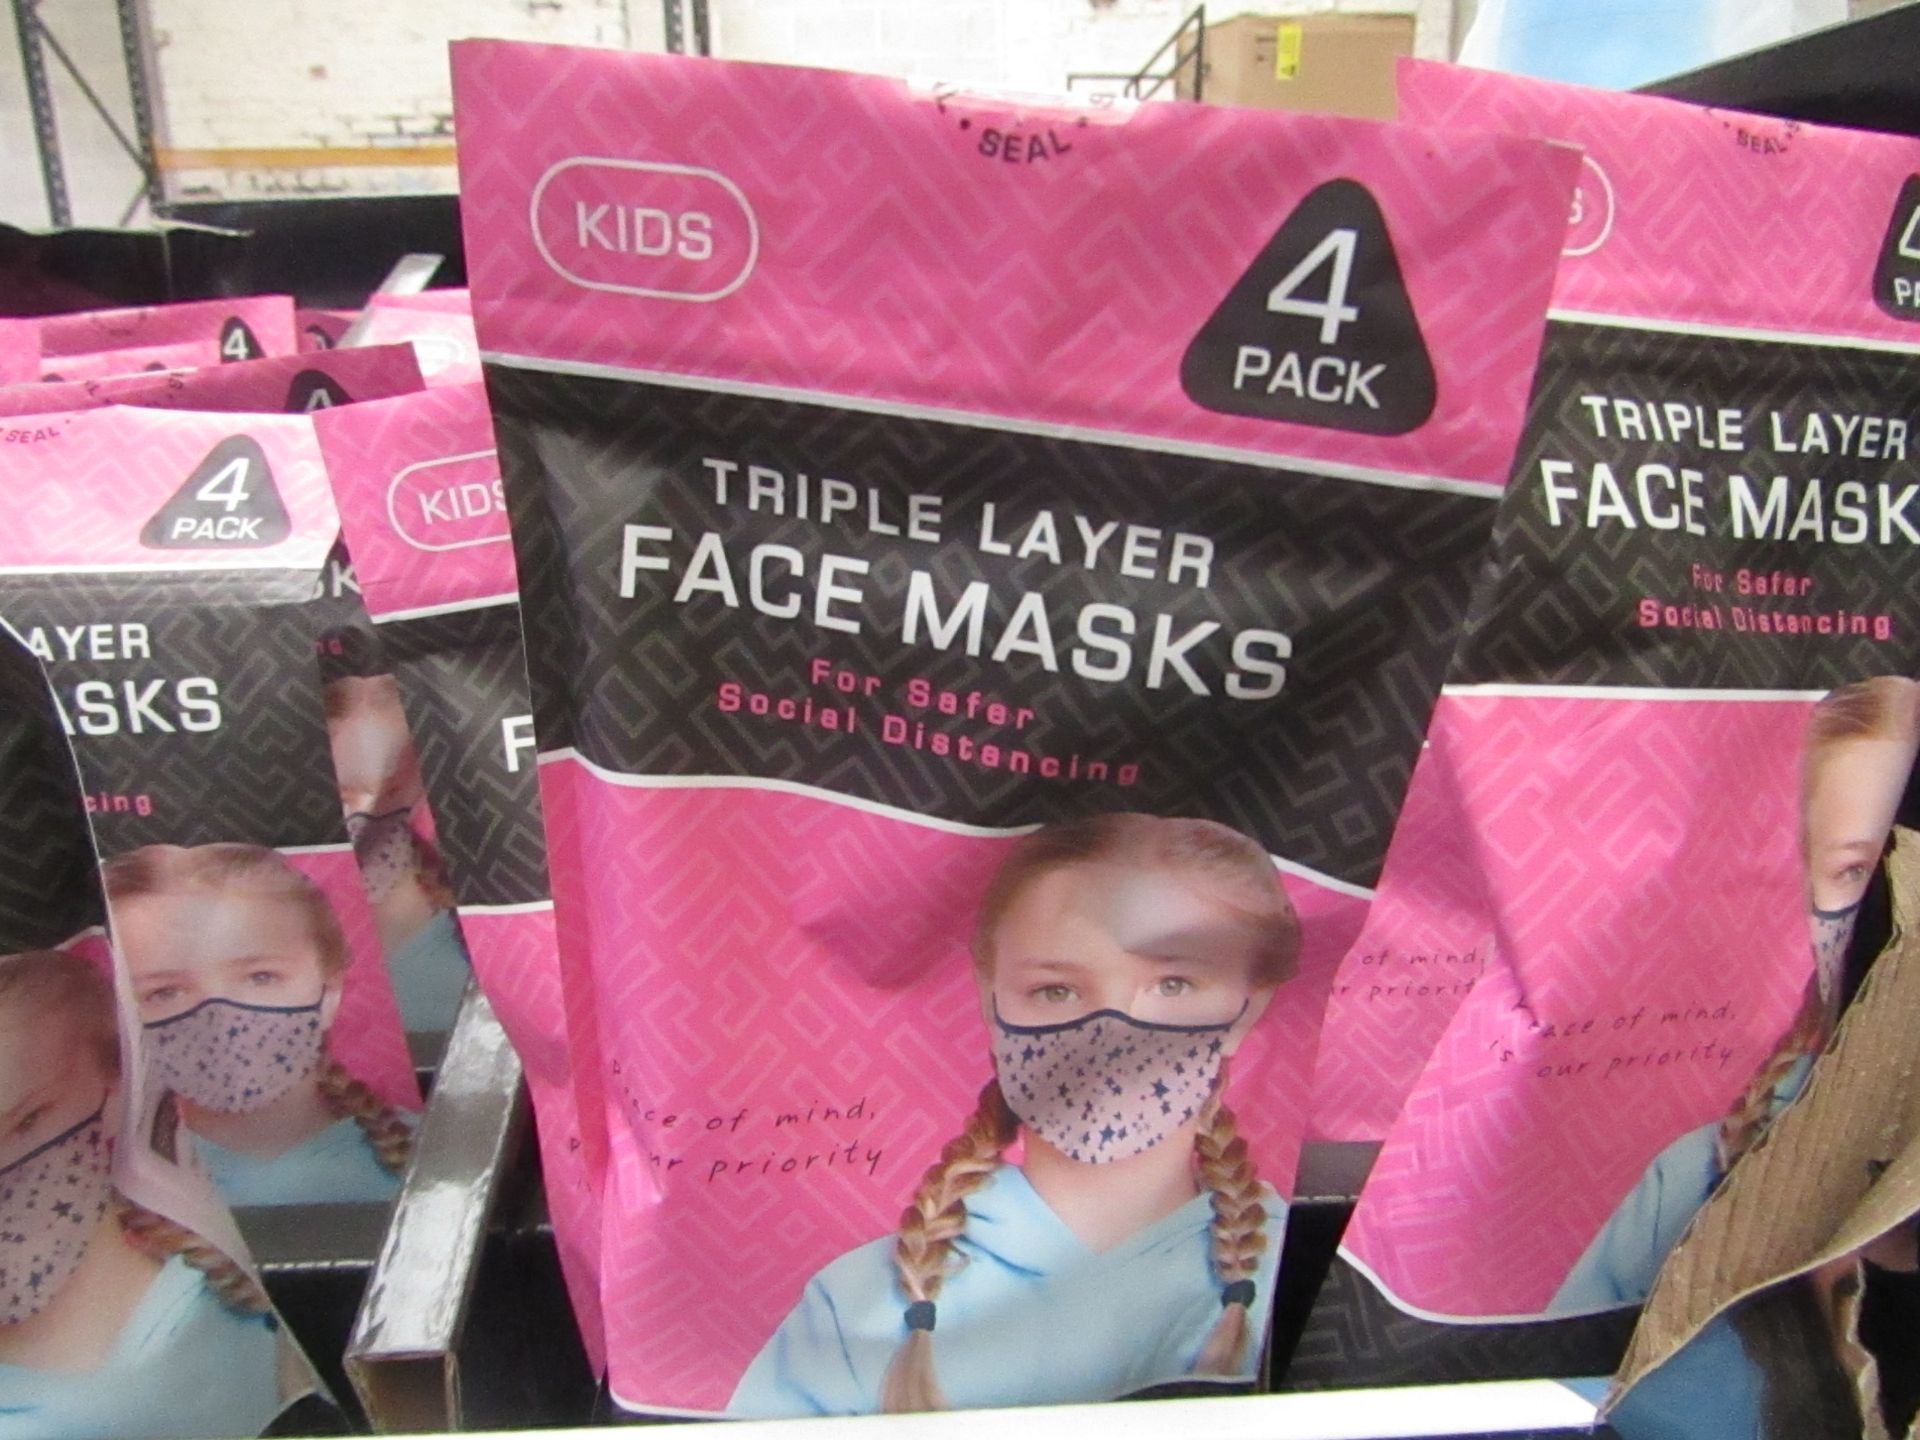 5x Social Lab - Childrens Triple Layer Face Masks - Girls (4 Per Pack) - New & Packaged. - Image 2 of 2